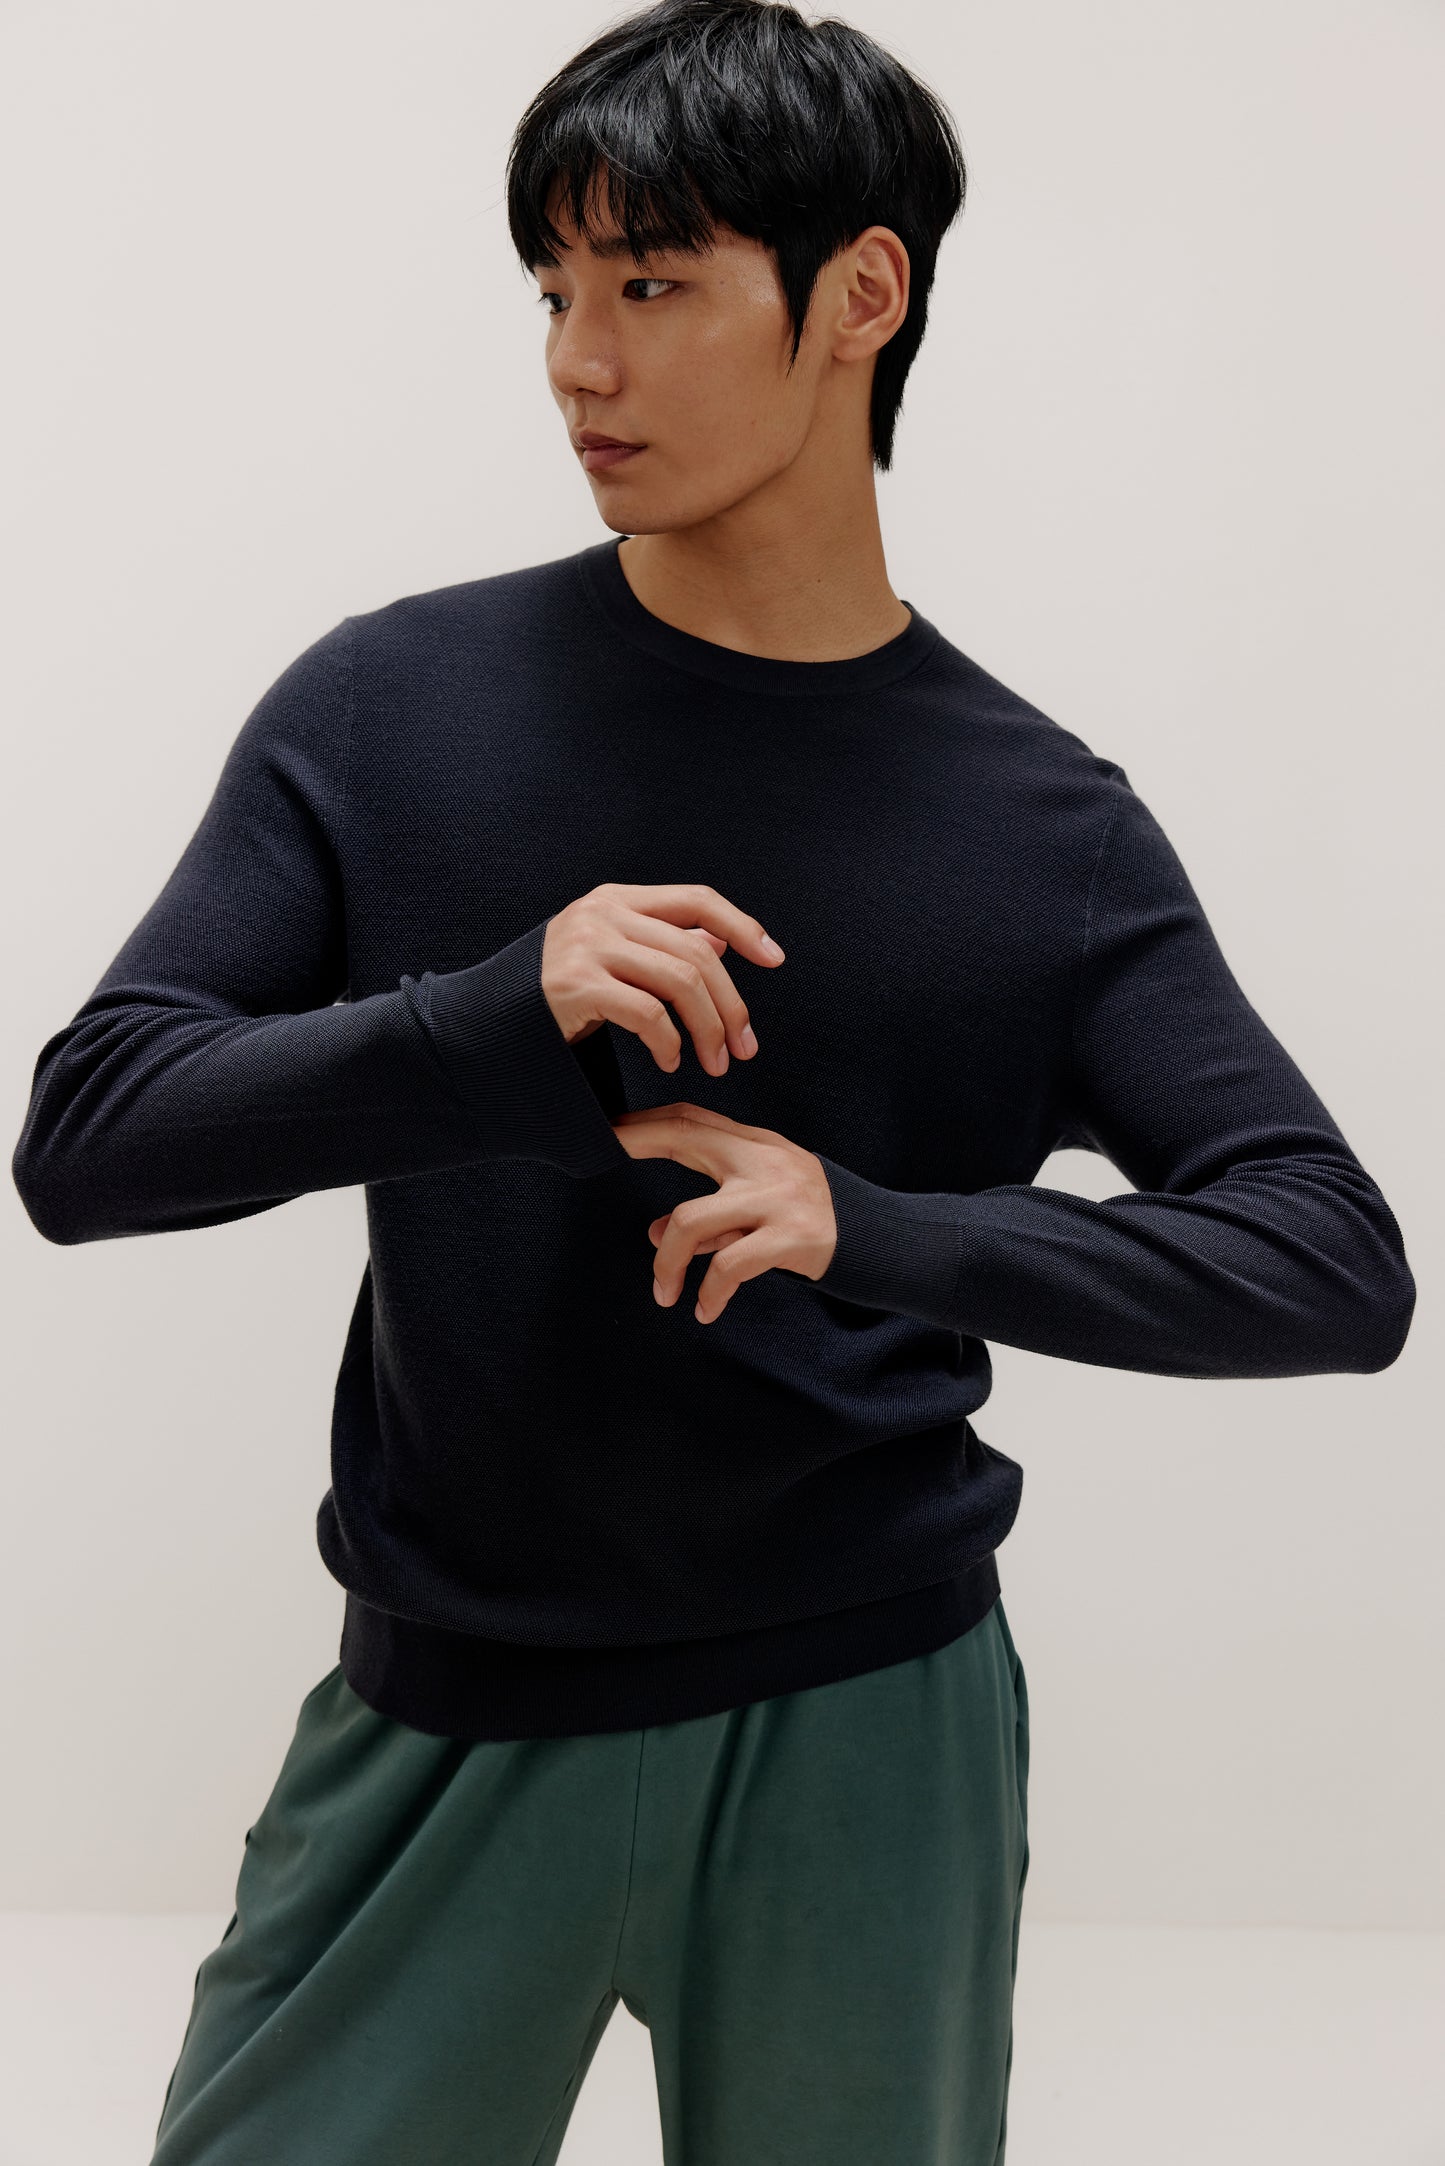 man in navy sweater and green pants